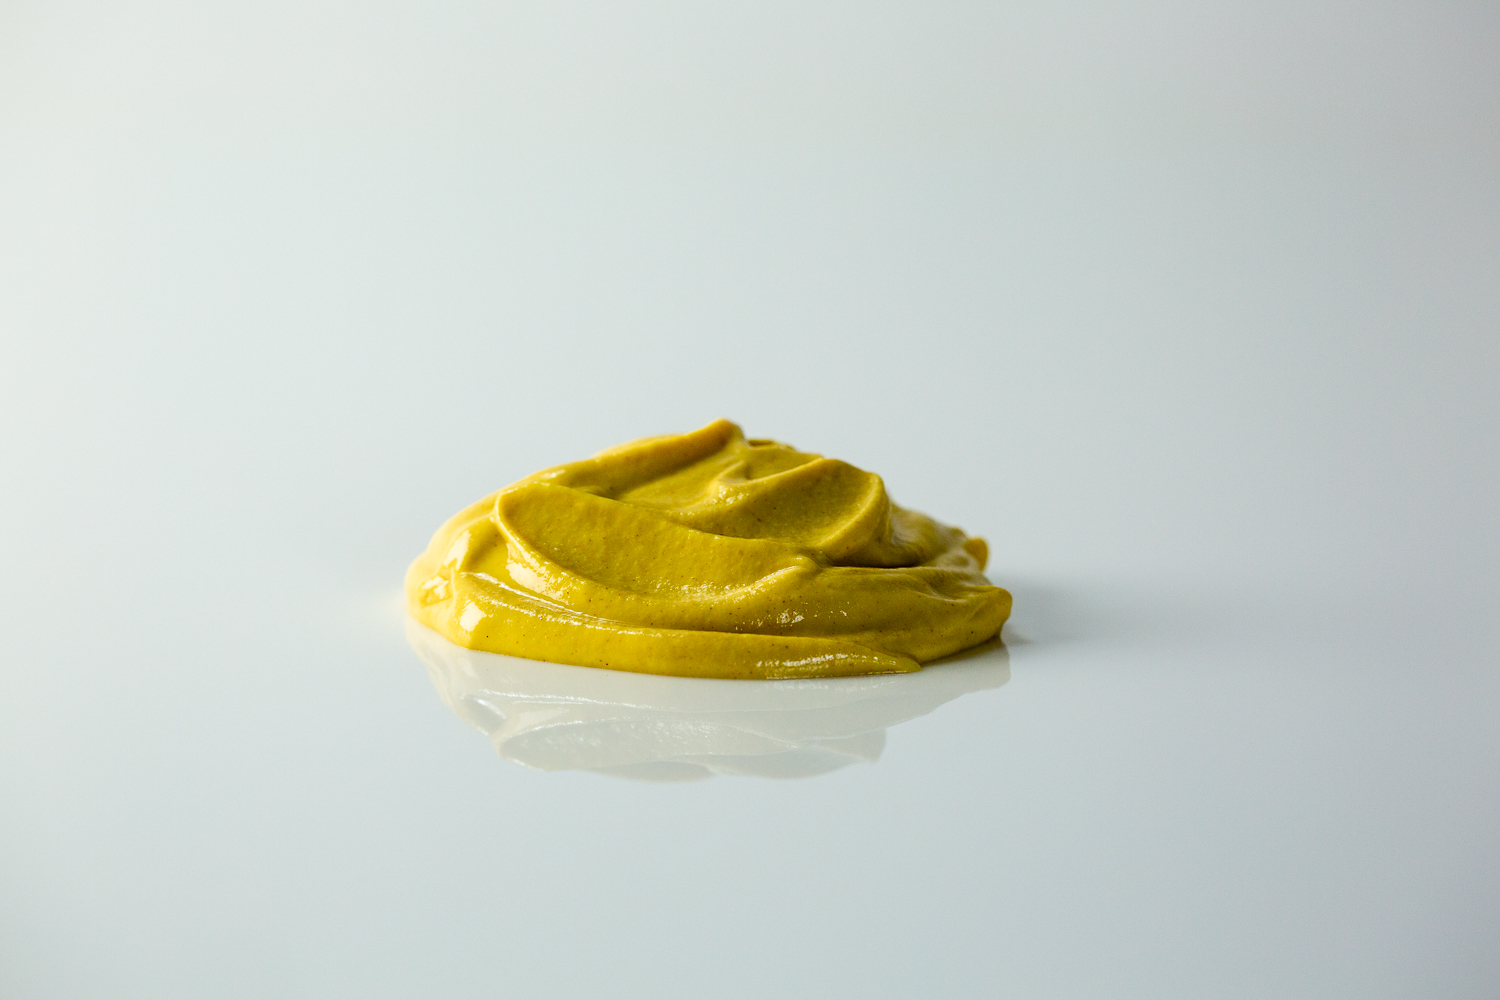 mustard images